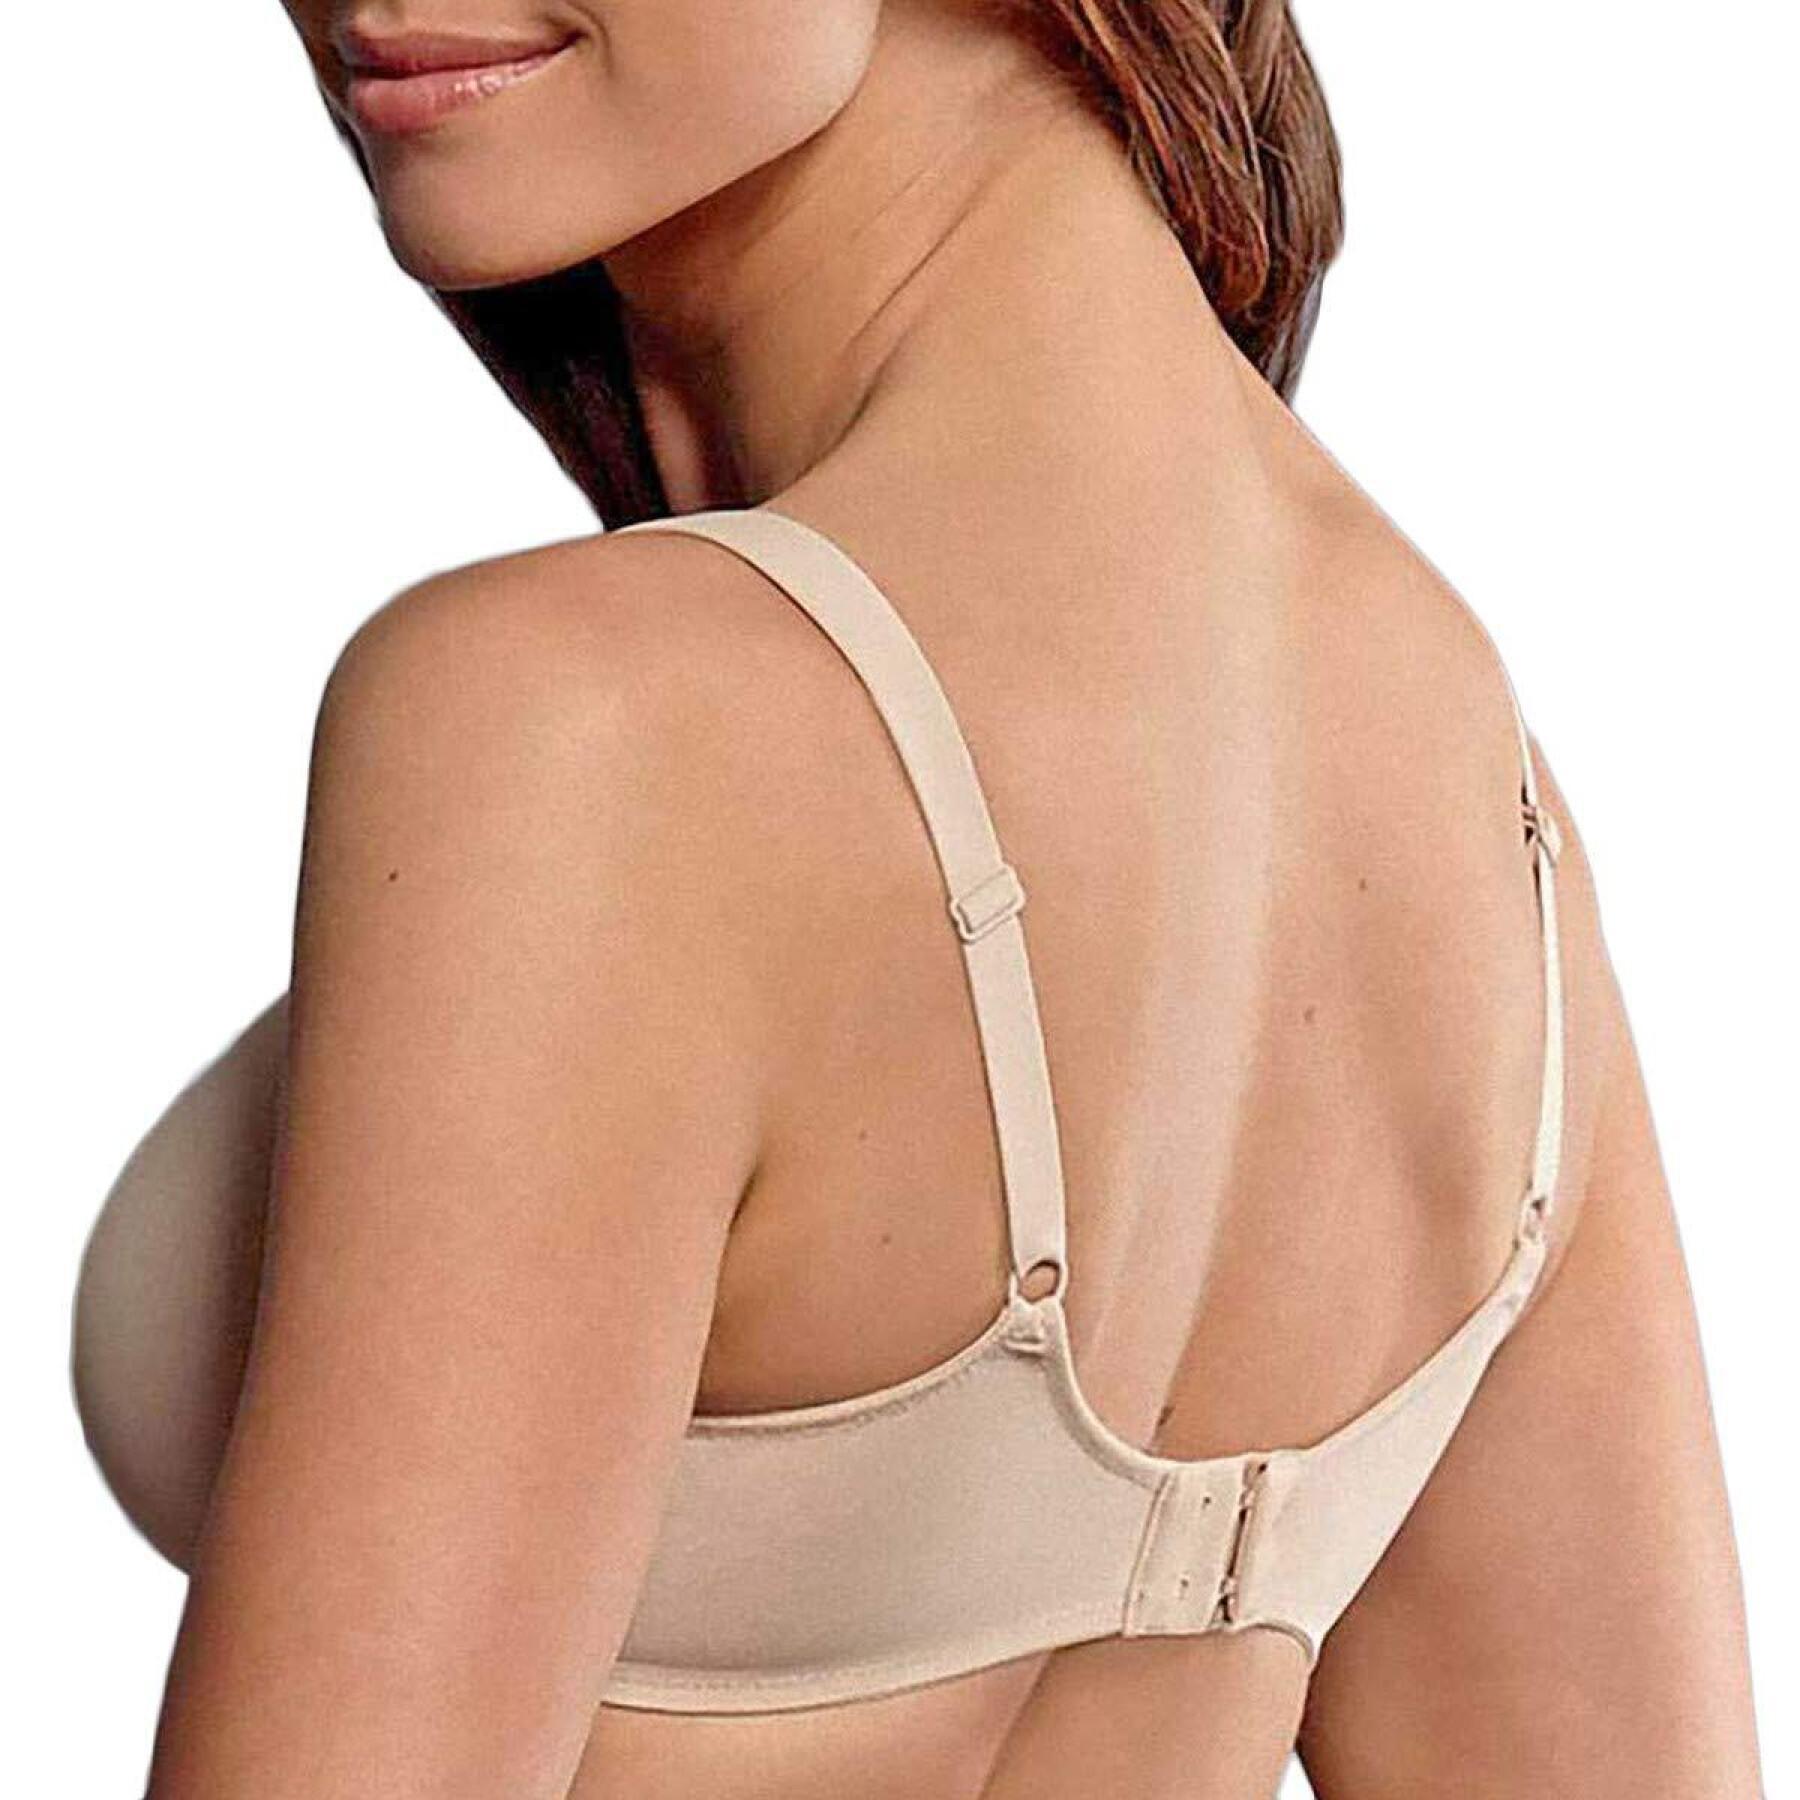 Nursing bra with underwire and cups for women Anita miss